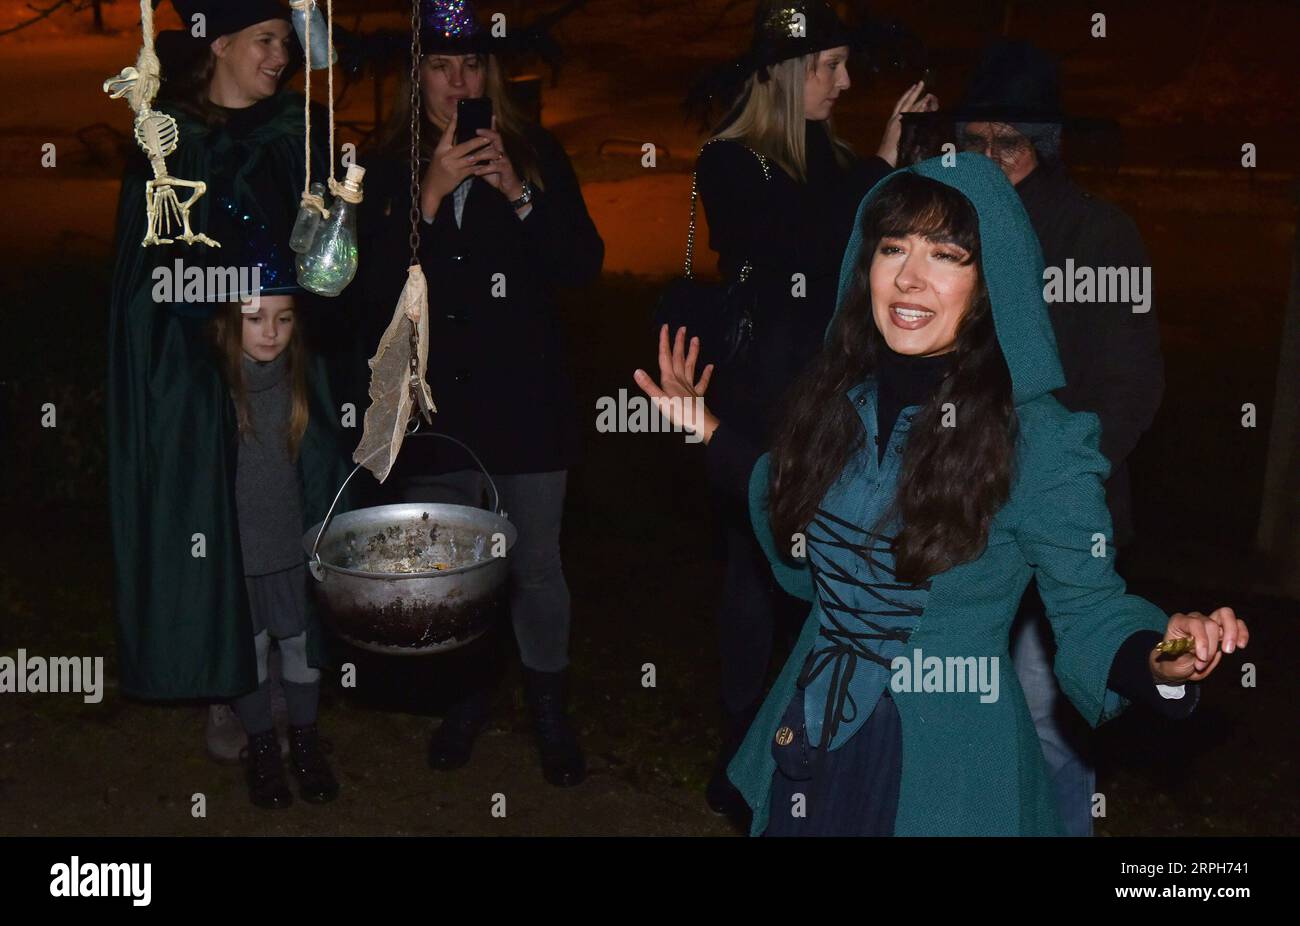 191031 -- ZAGREB, Oct. 31, 2019 -- People dressed in costumes take part in a night tour called Uppertown Witches in Zagreb, Croatia, Oct. 31, 2019. The guided tour involves interactive entertainment and introduction to Middle Ages history. /Pixsell via Xinhua CROATIA-ZAGREB-WITCHES TOUR DavorinxVisnjic PUBLICATIONxNOTxINxCHN Stock Photo